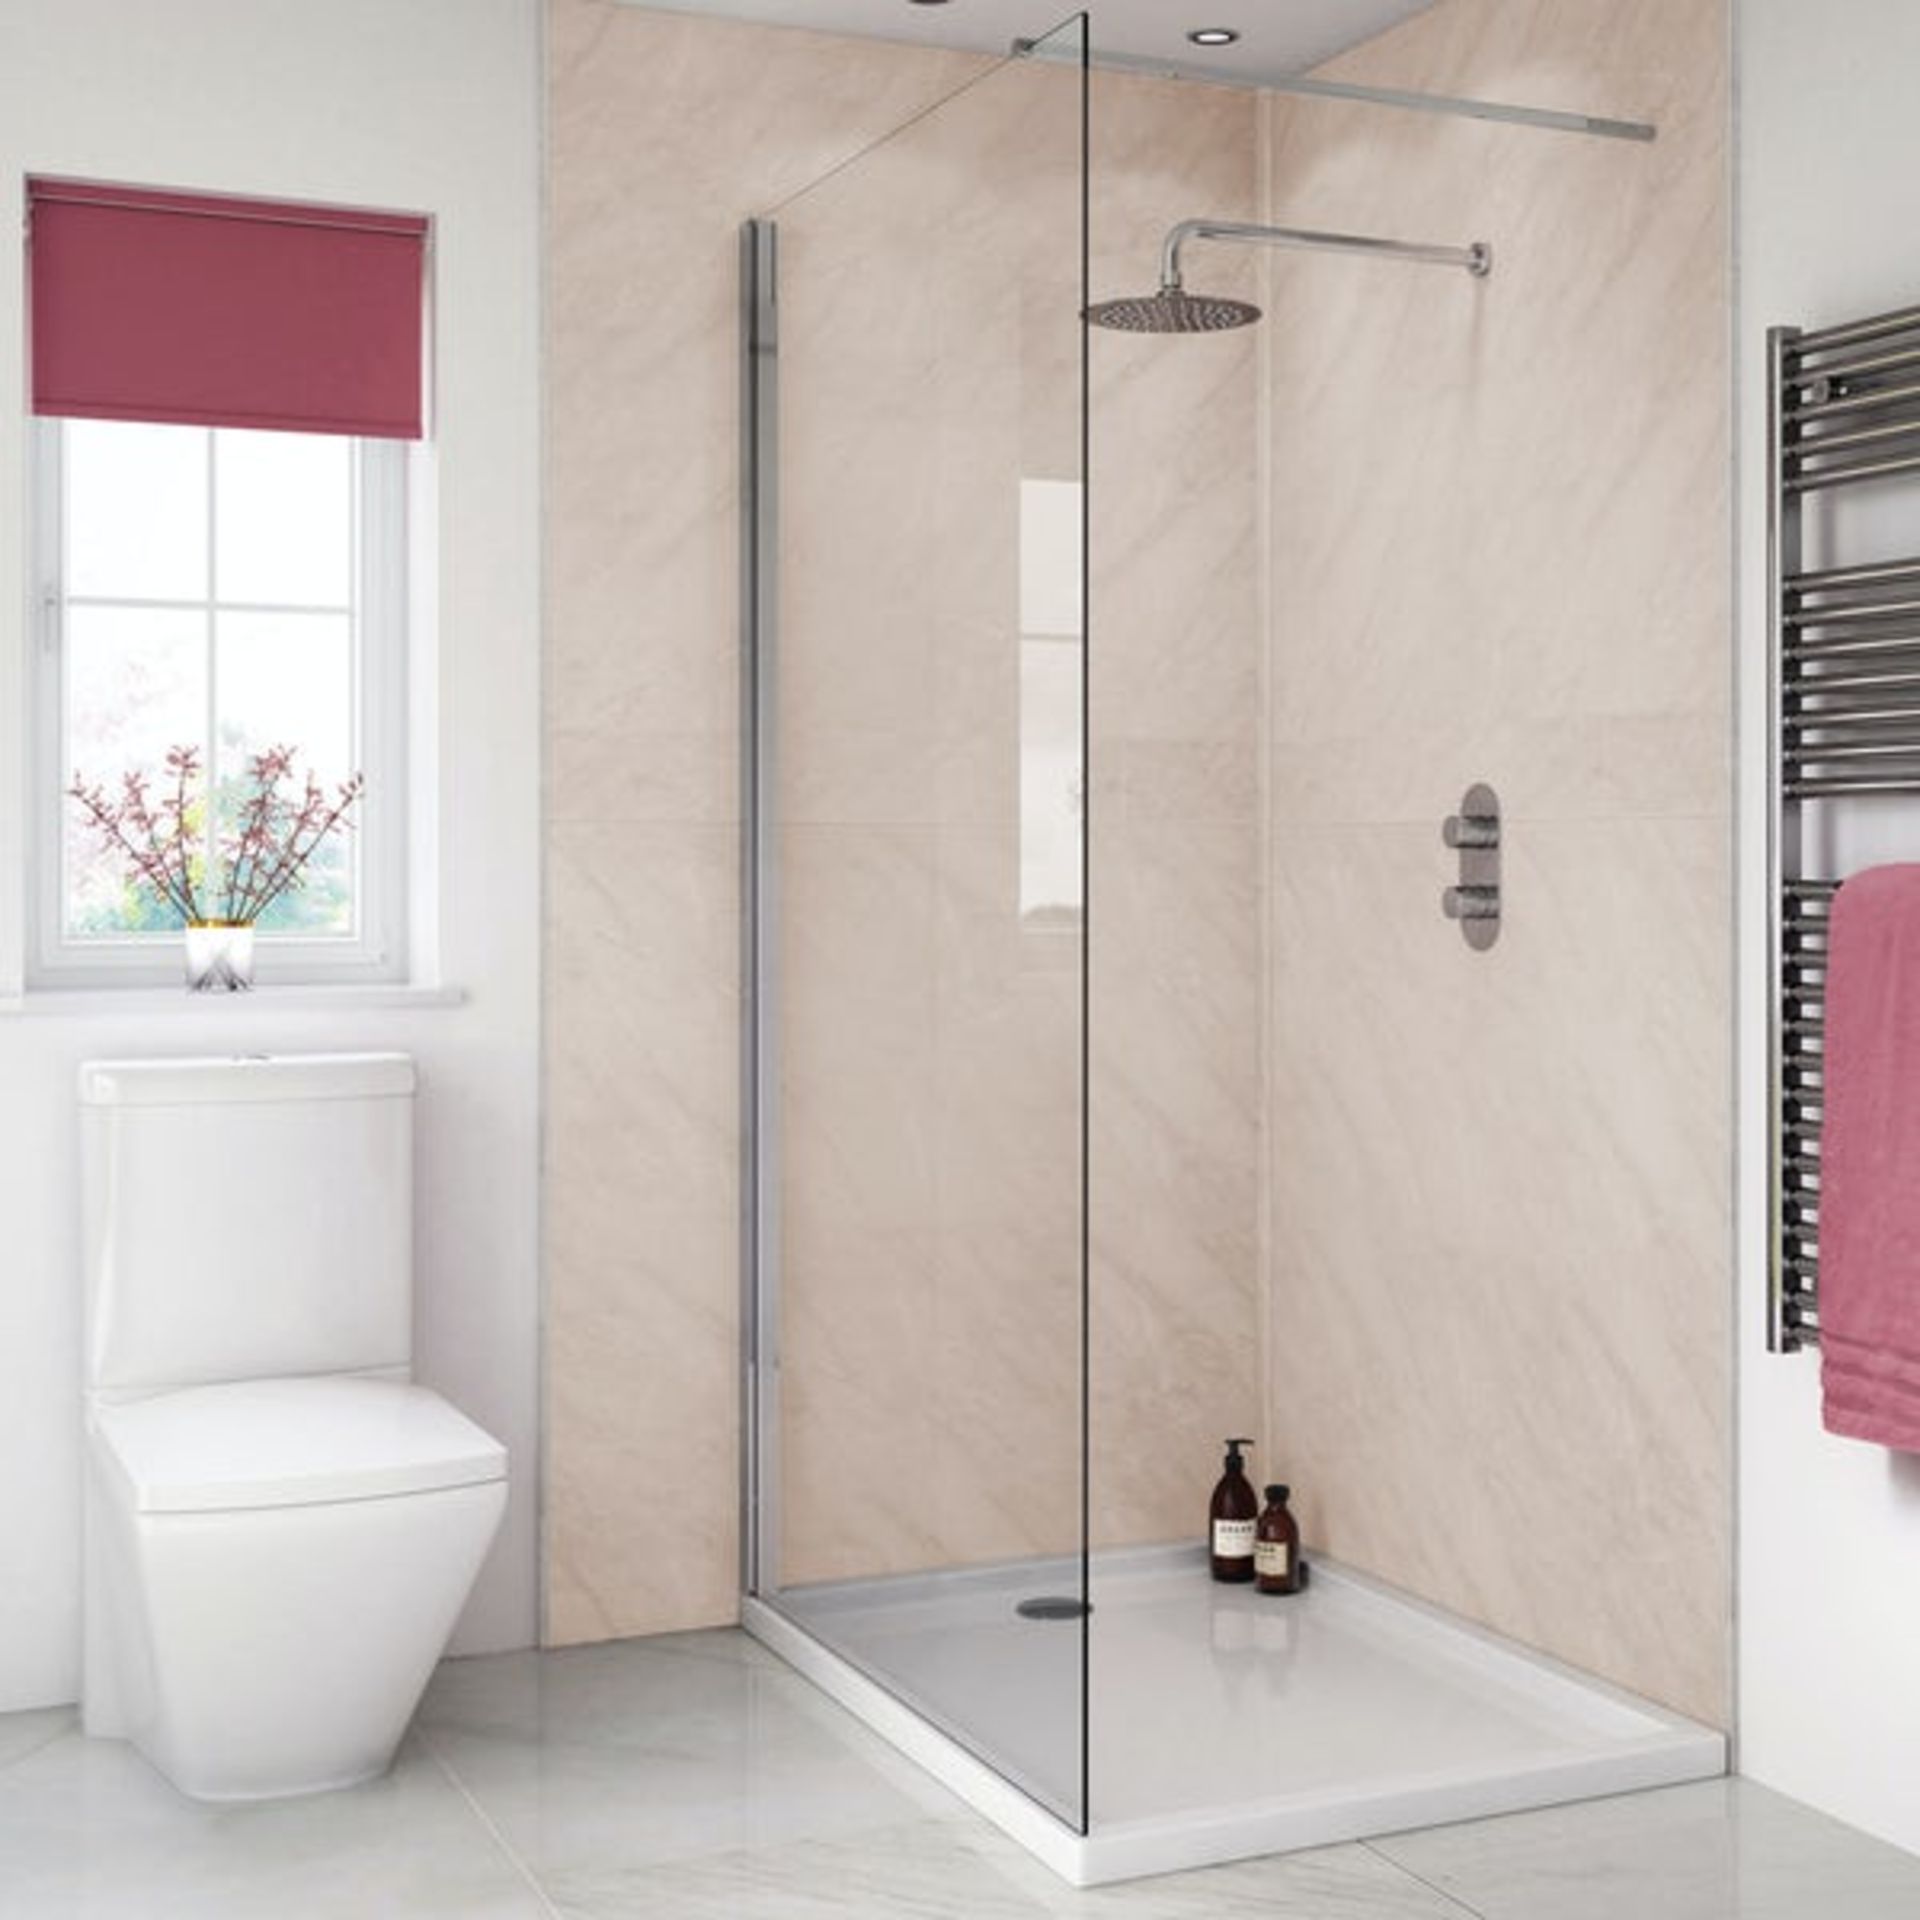 Splash Panel 2 sided shower wall kit in Classic Marble, new and boxed, the kit contains 2 - Image 3 of 4